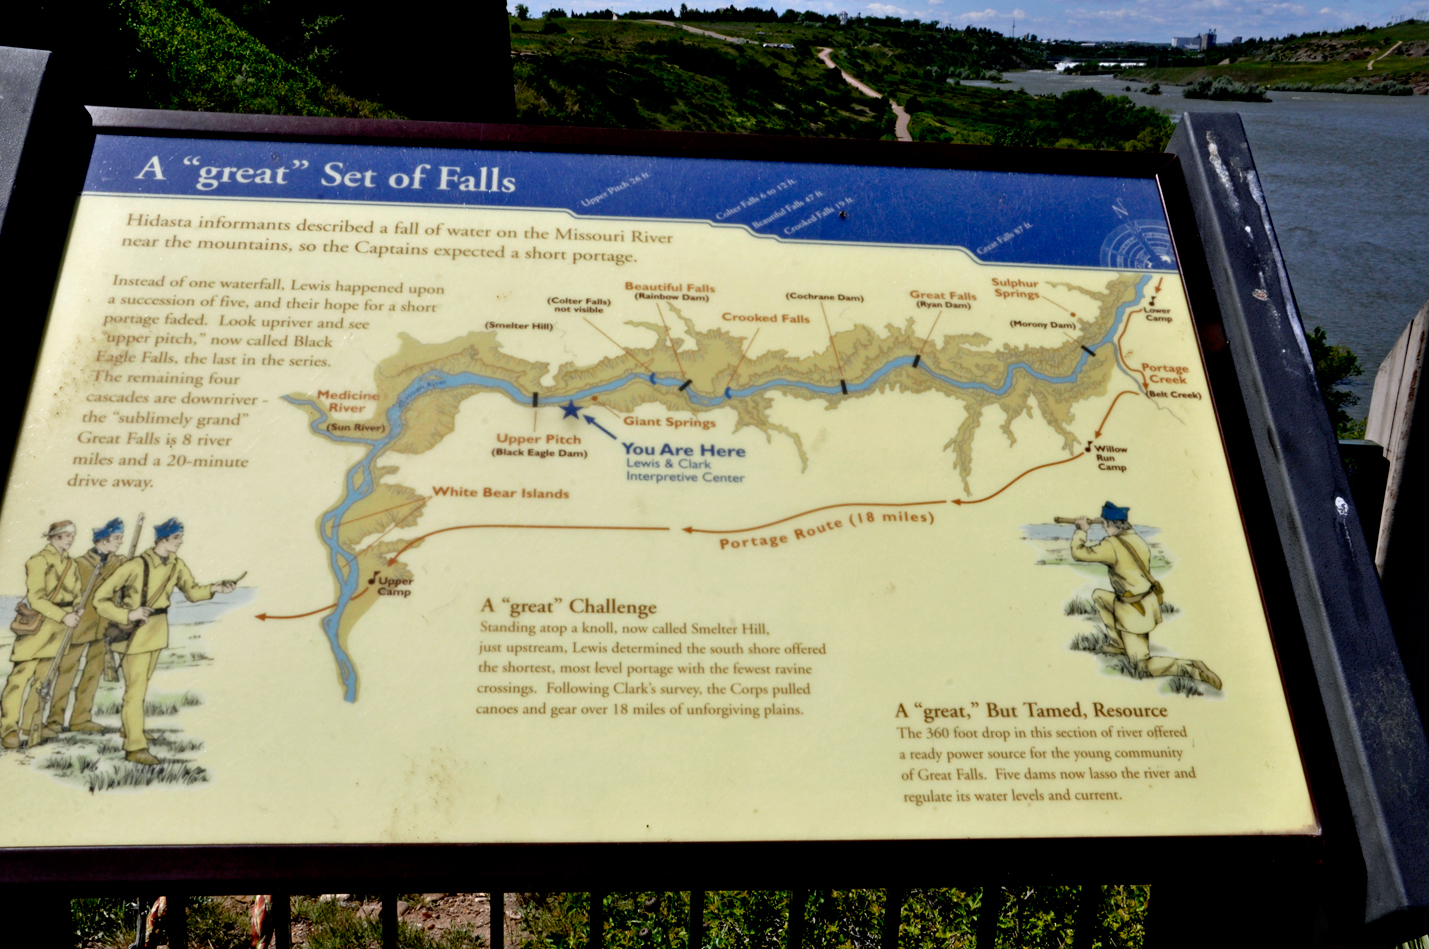 sign about a great set of falls